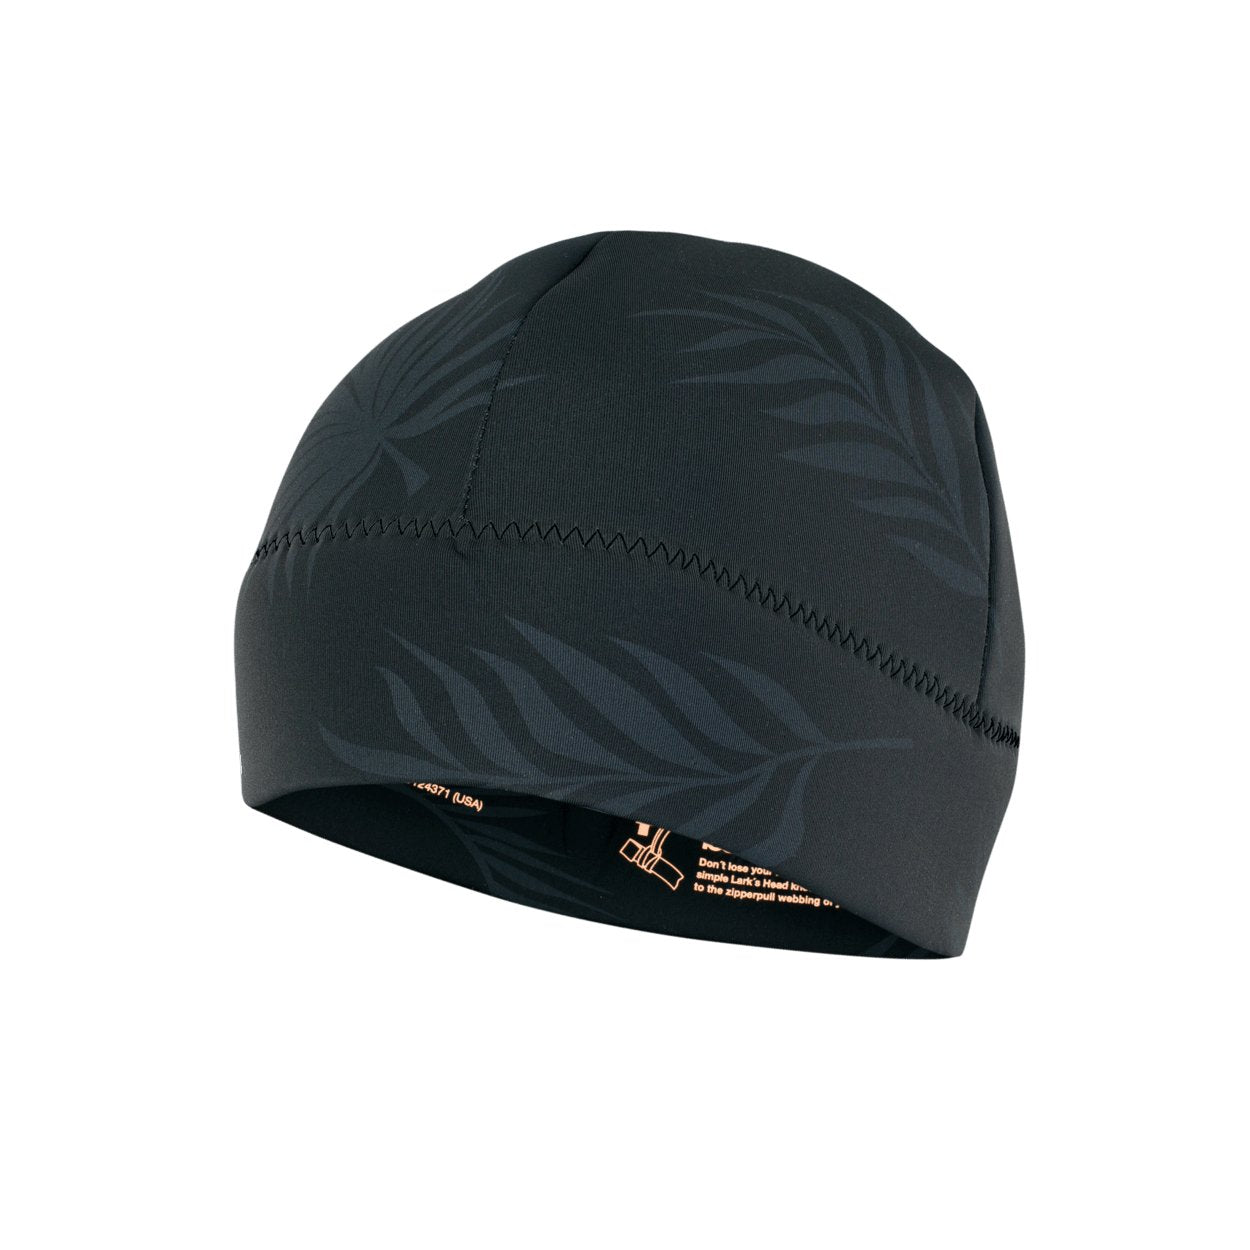 ION Neo Grace Beanie 2022 - Worthing Watersports - 9010583053806 - Neo Accessories - ION Water